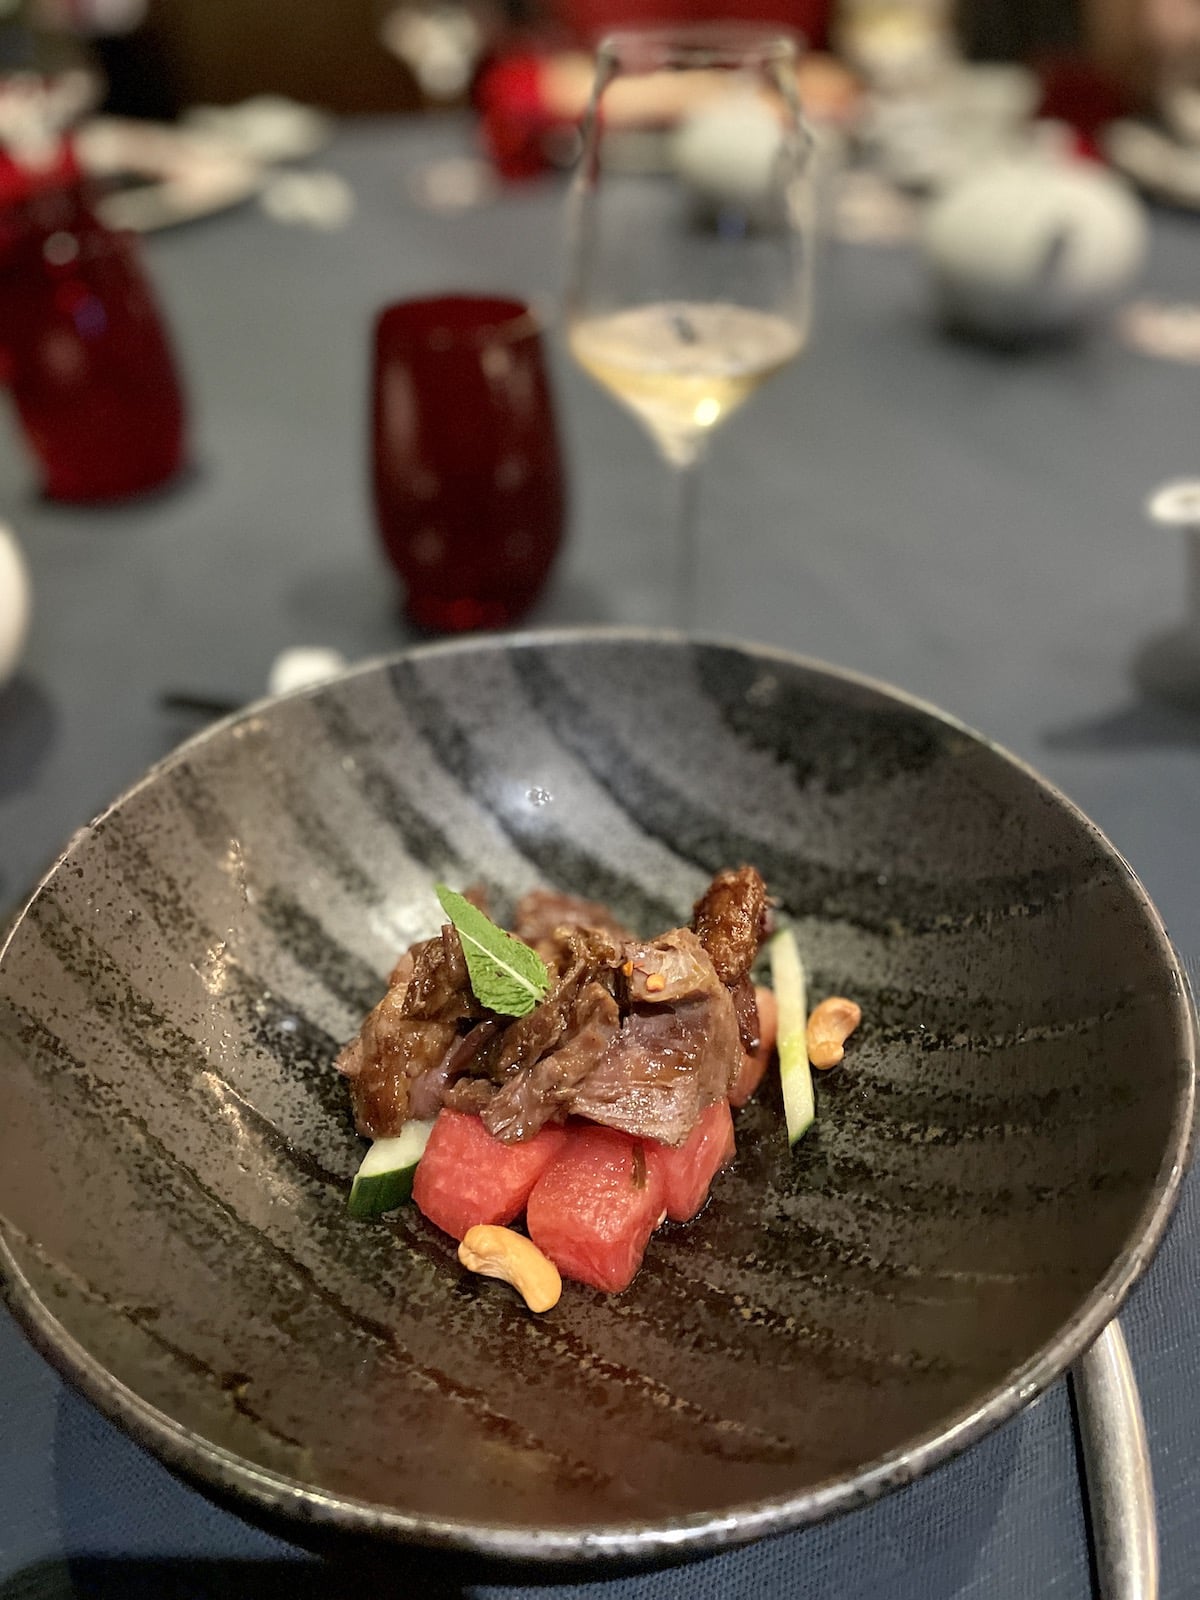 Seared duck and watermelon salad in grey bowl.